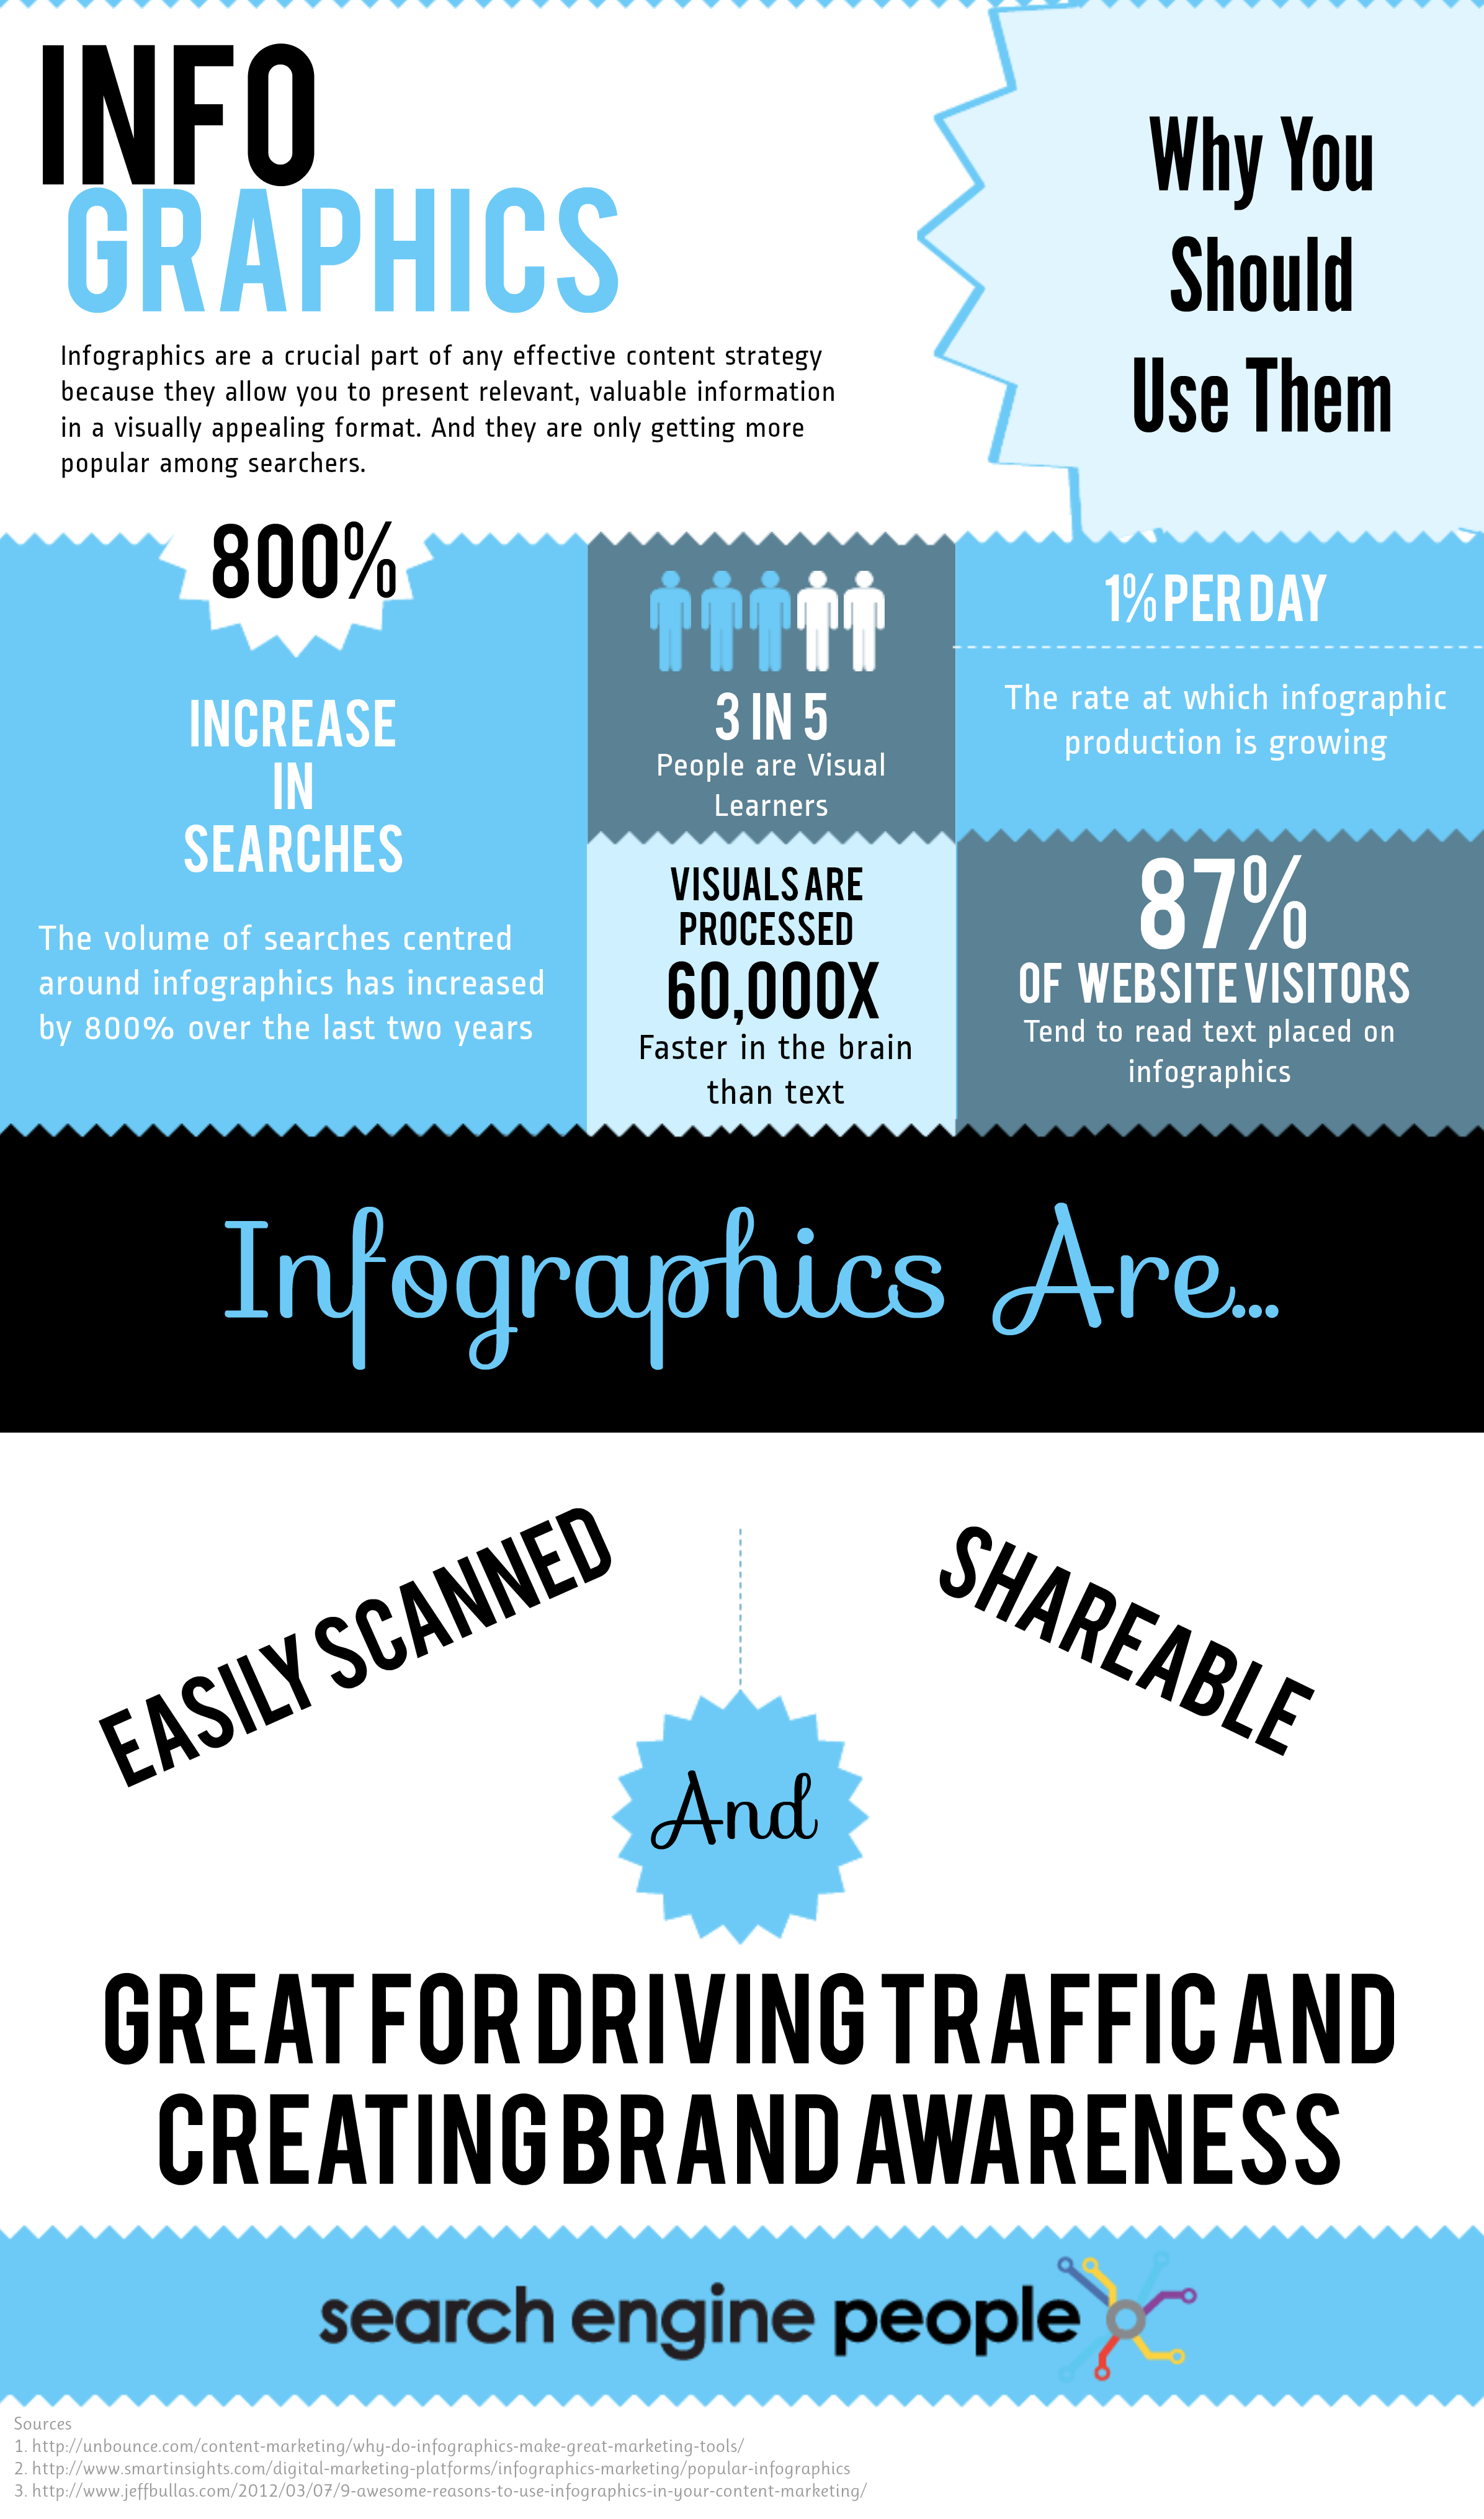 How To Create A Website: The Definitive Beginners Guide [Infographic] | Visual.ly